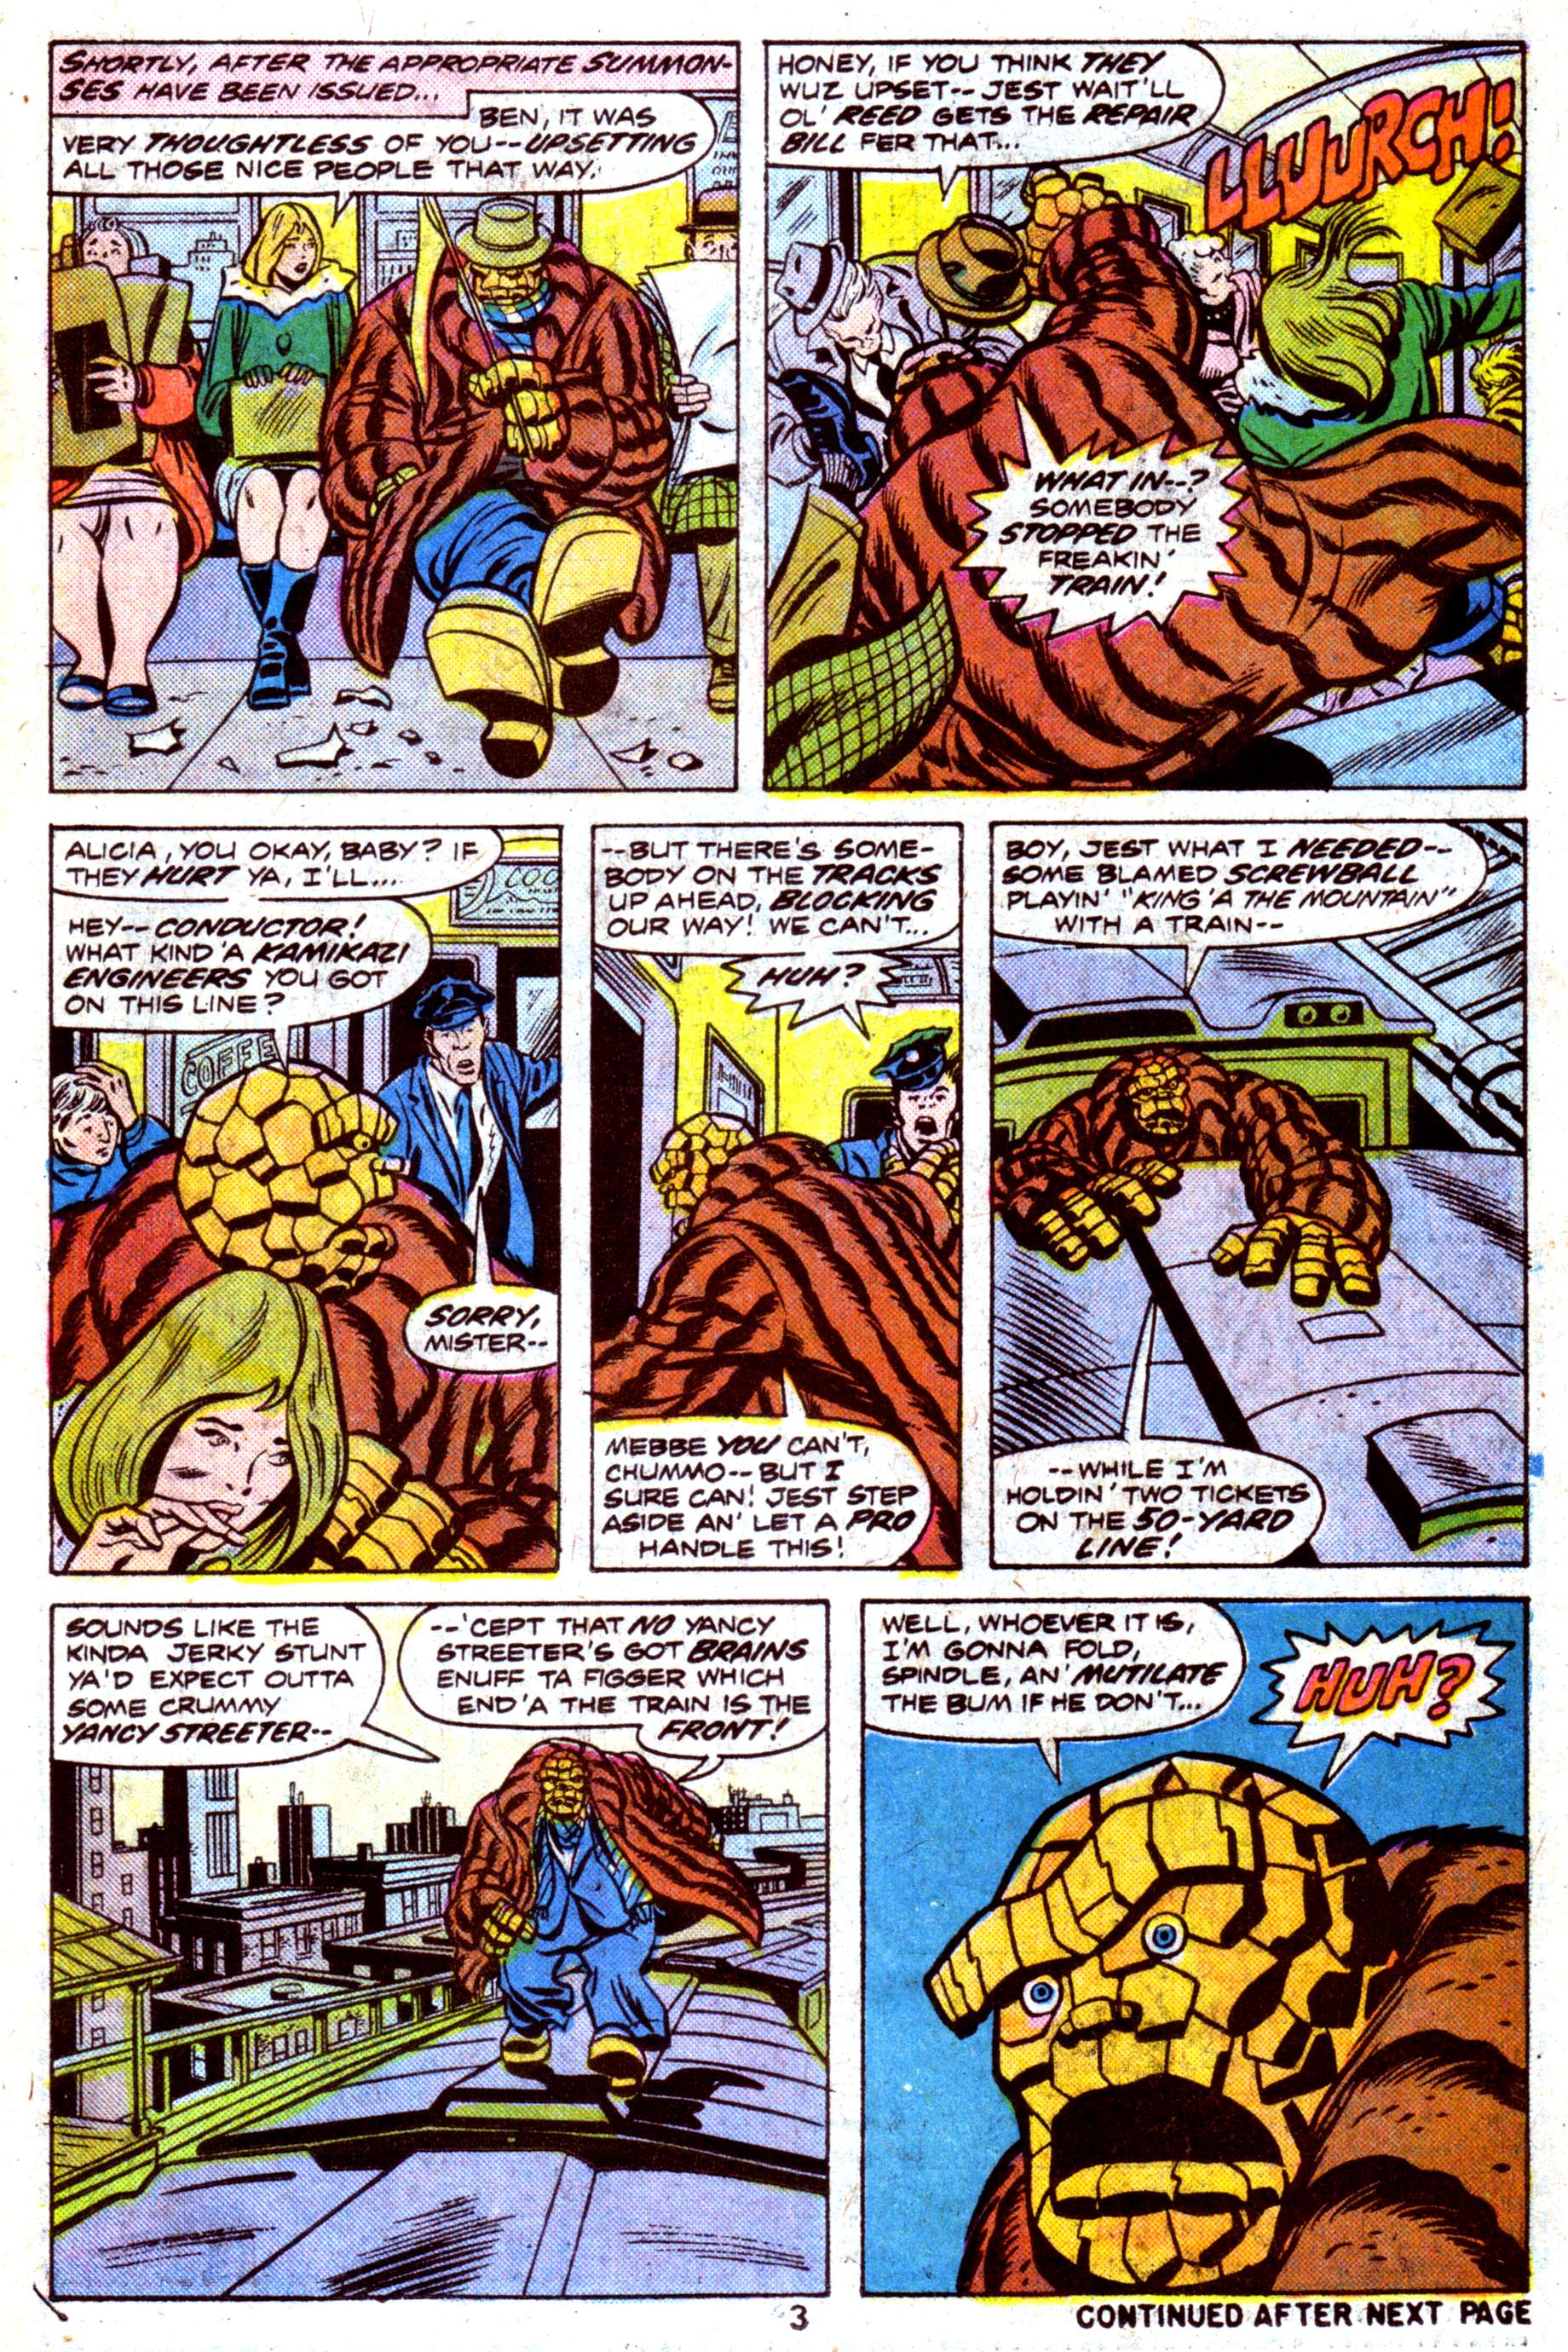 Read online Giant-Size Fantastic Four comic -  Issue #4 - 5